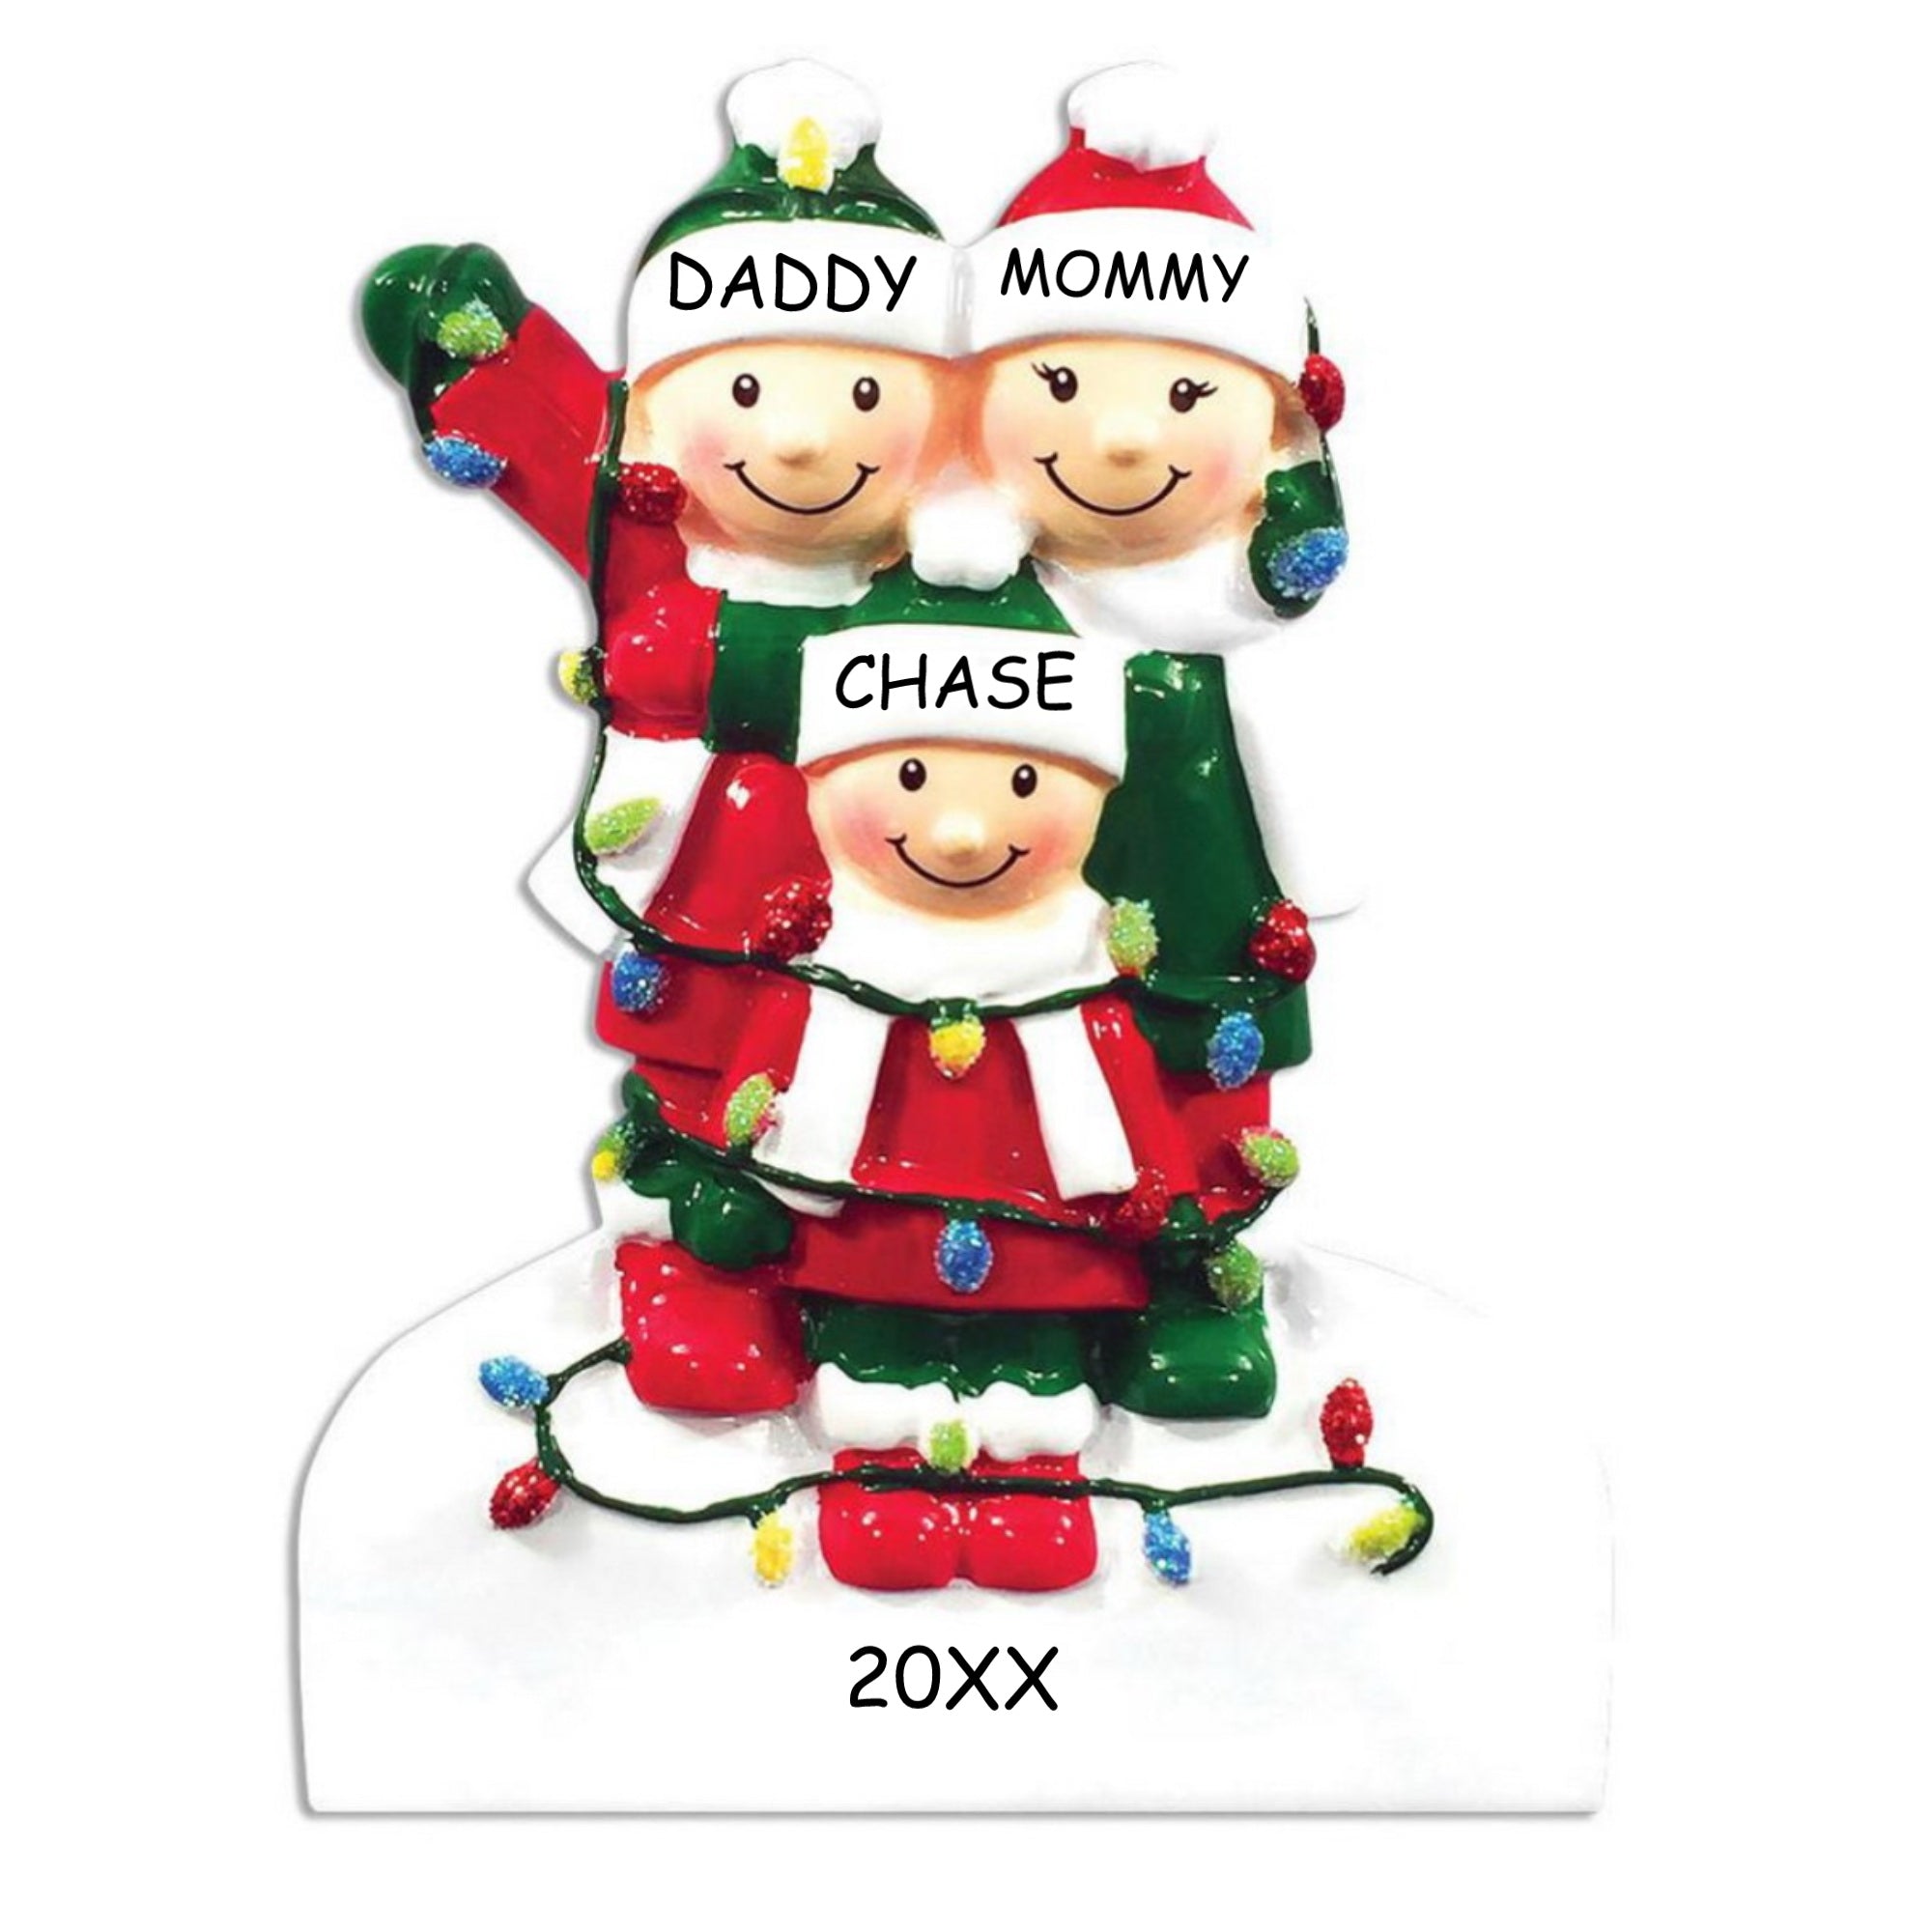 Personalized Tangled in Lights Family Christmas Ornament - Family of 3